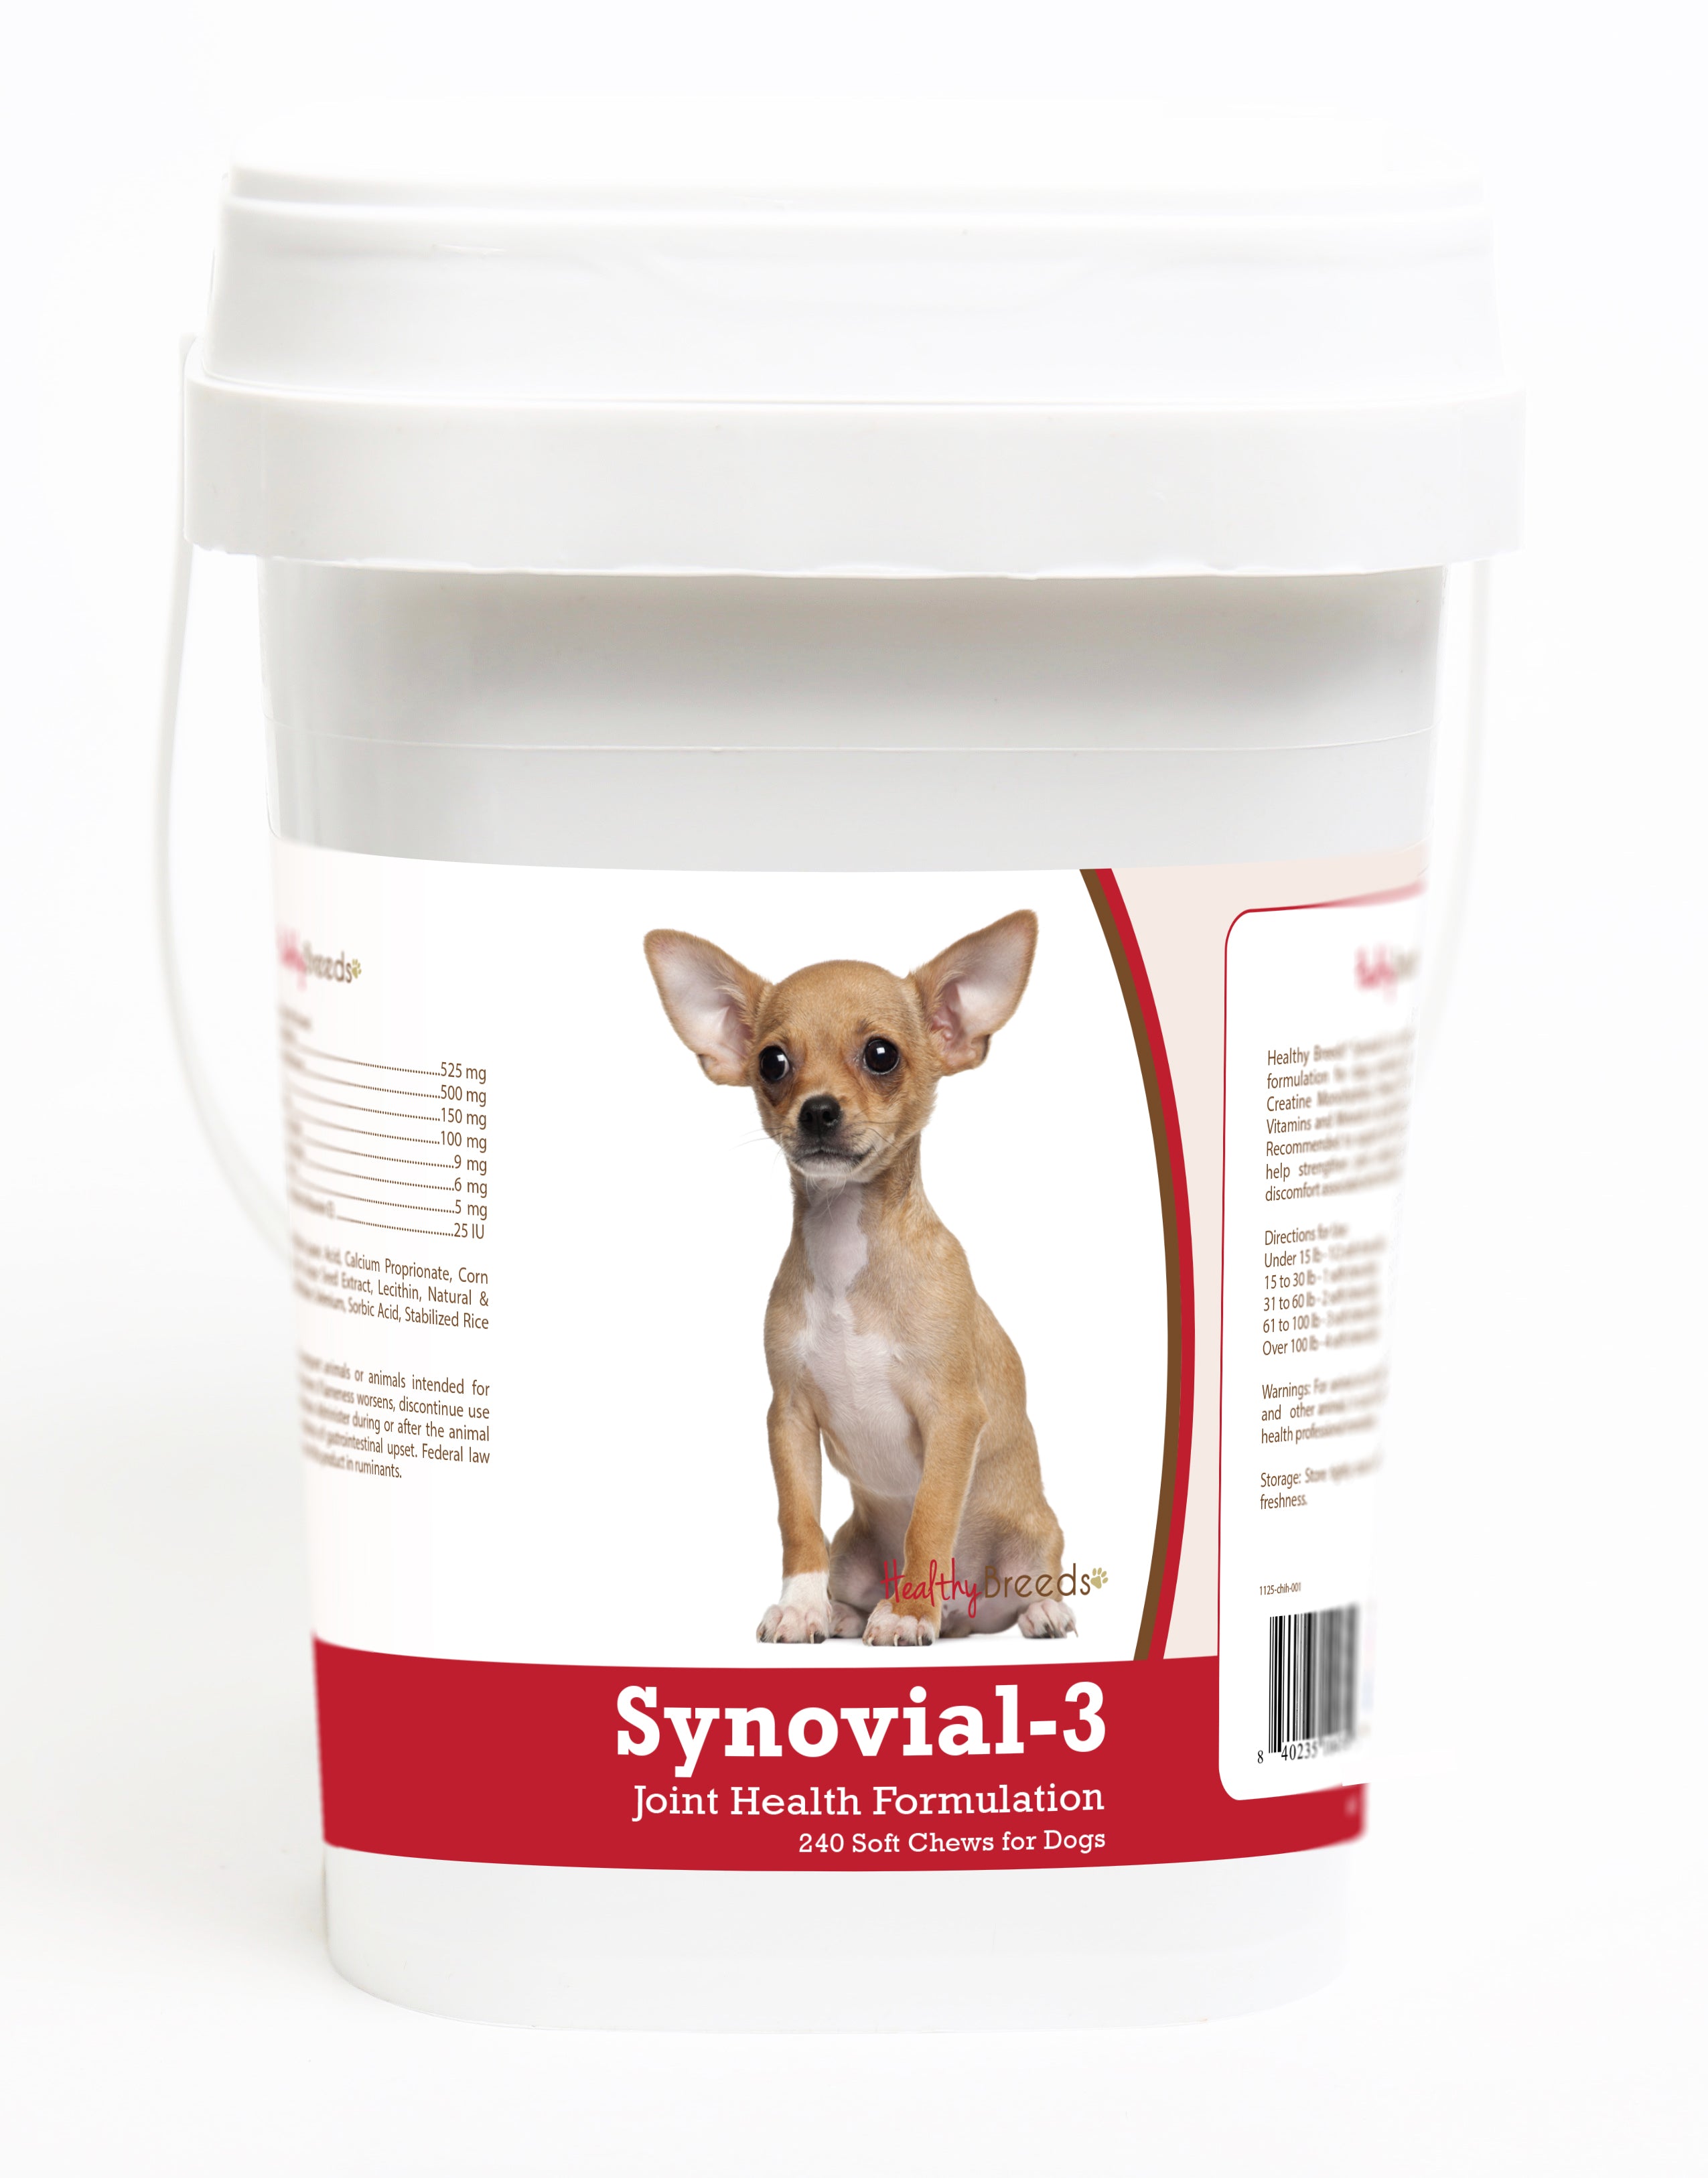 Chihuahua Synovial-3 Joint Health Formulation Soft Chews 240 Count